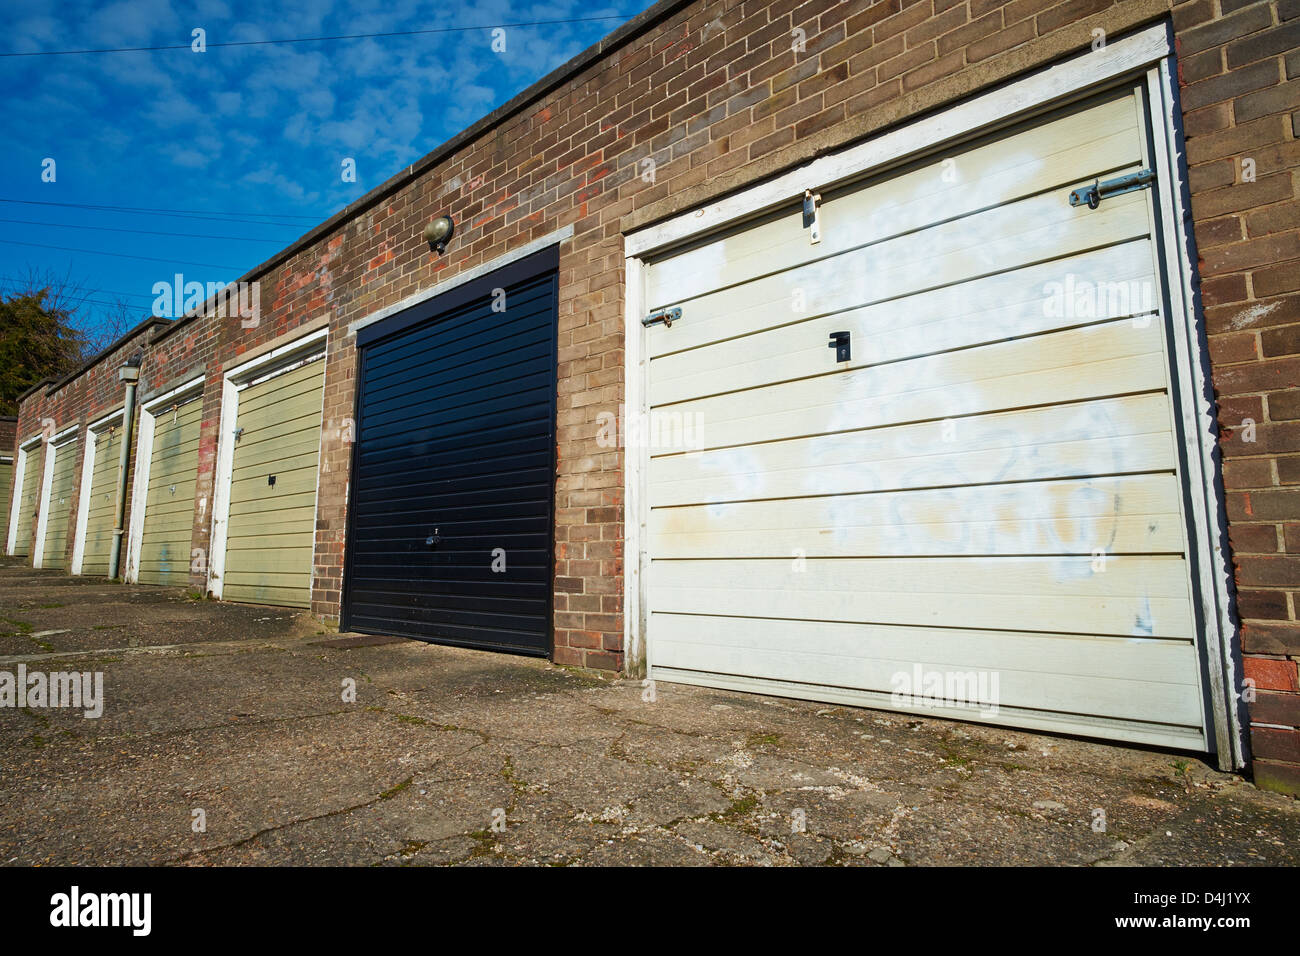 Row of Garages with metal doors Danesgate Lincoln Lincolnshire England Stock Photo